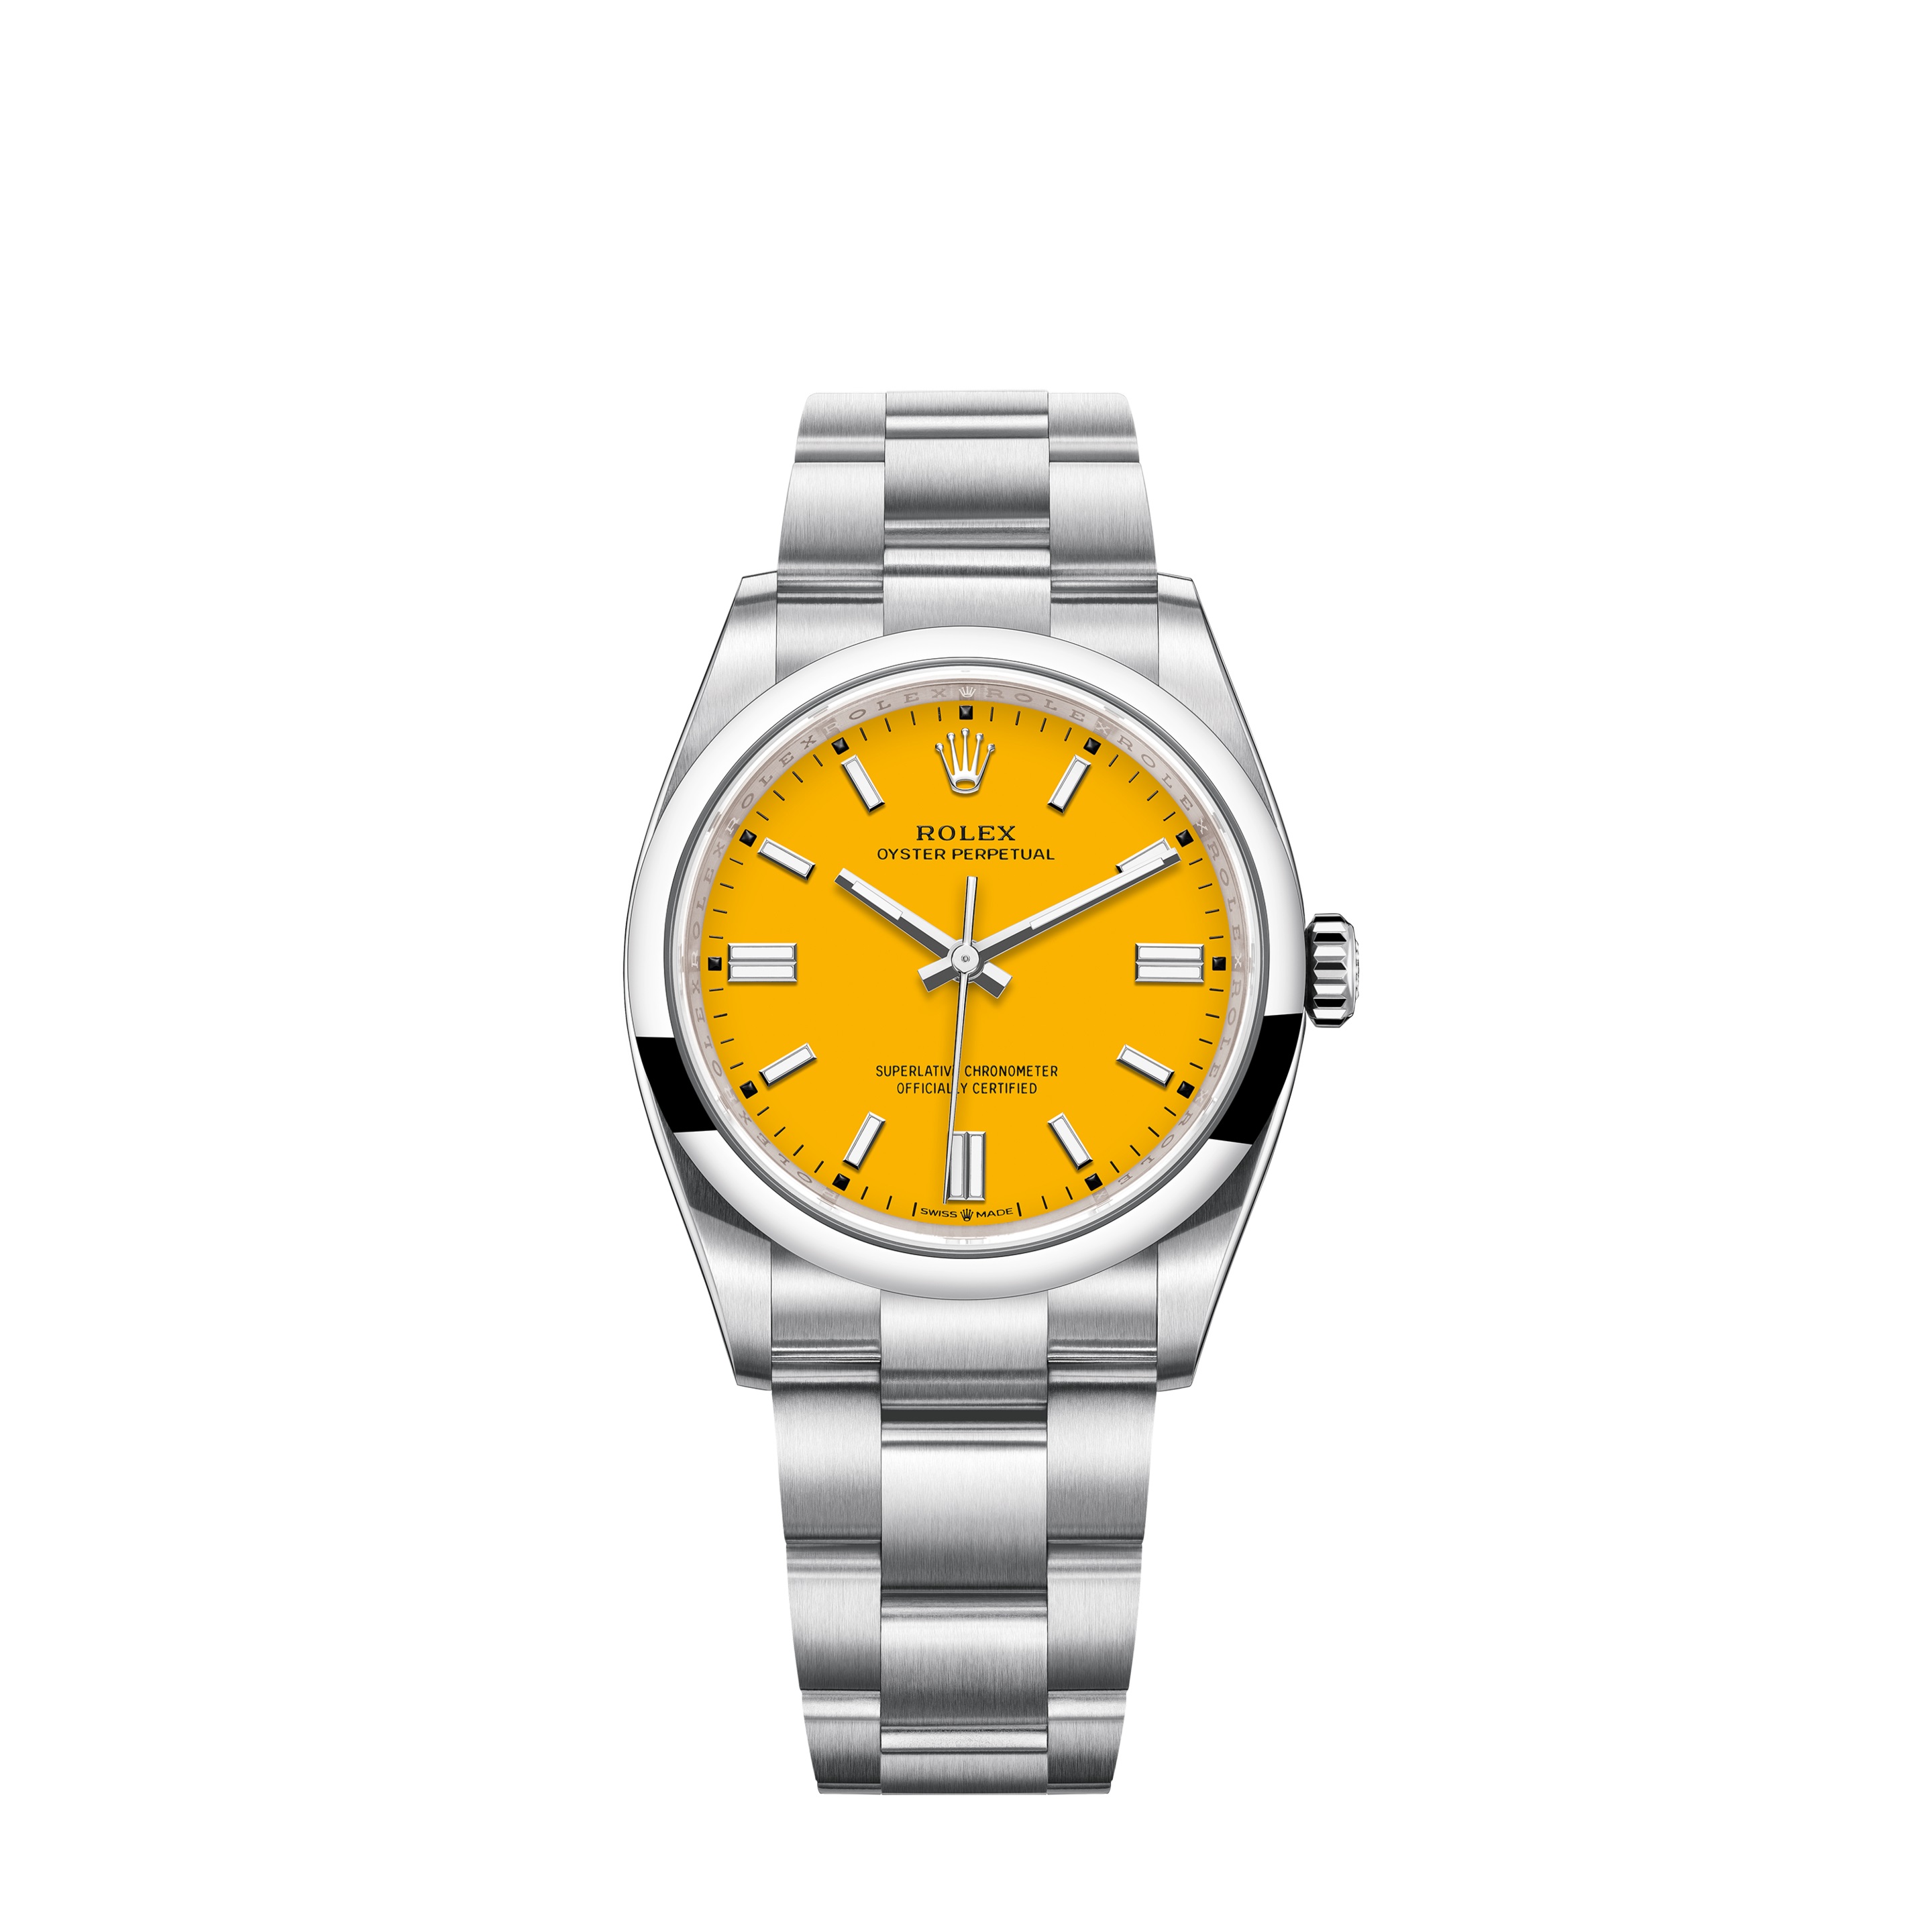 Oyster Perpetual 36 126000 Stainless Steel Watch (Yellow)